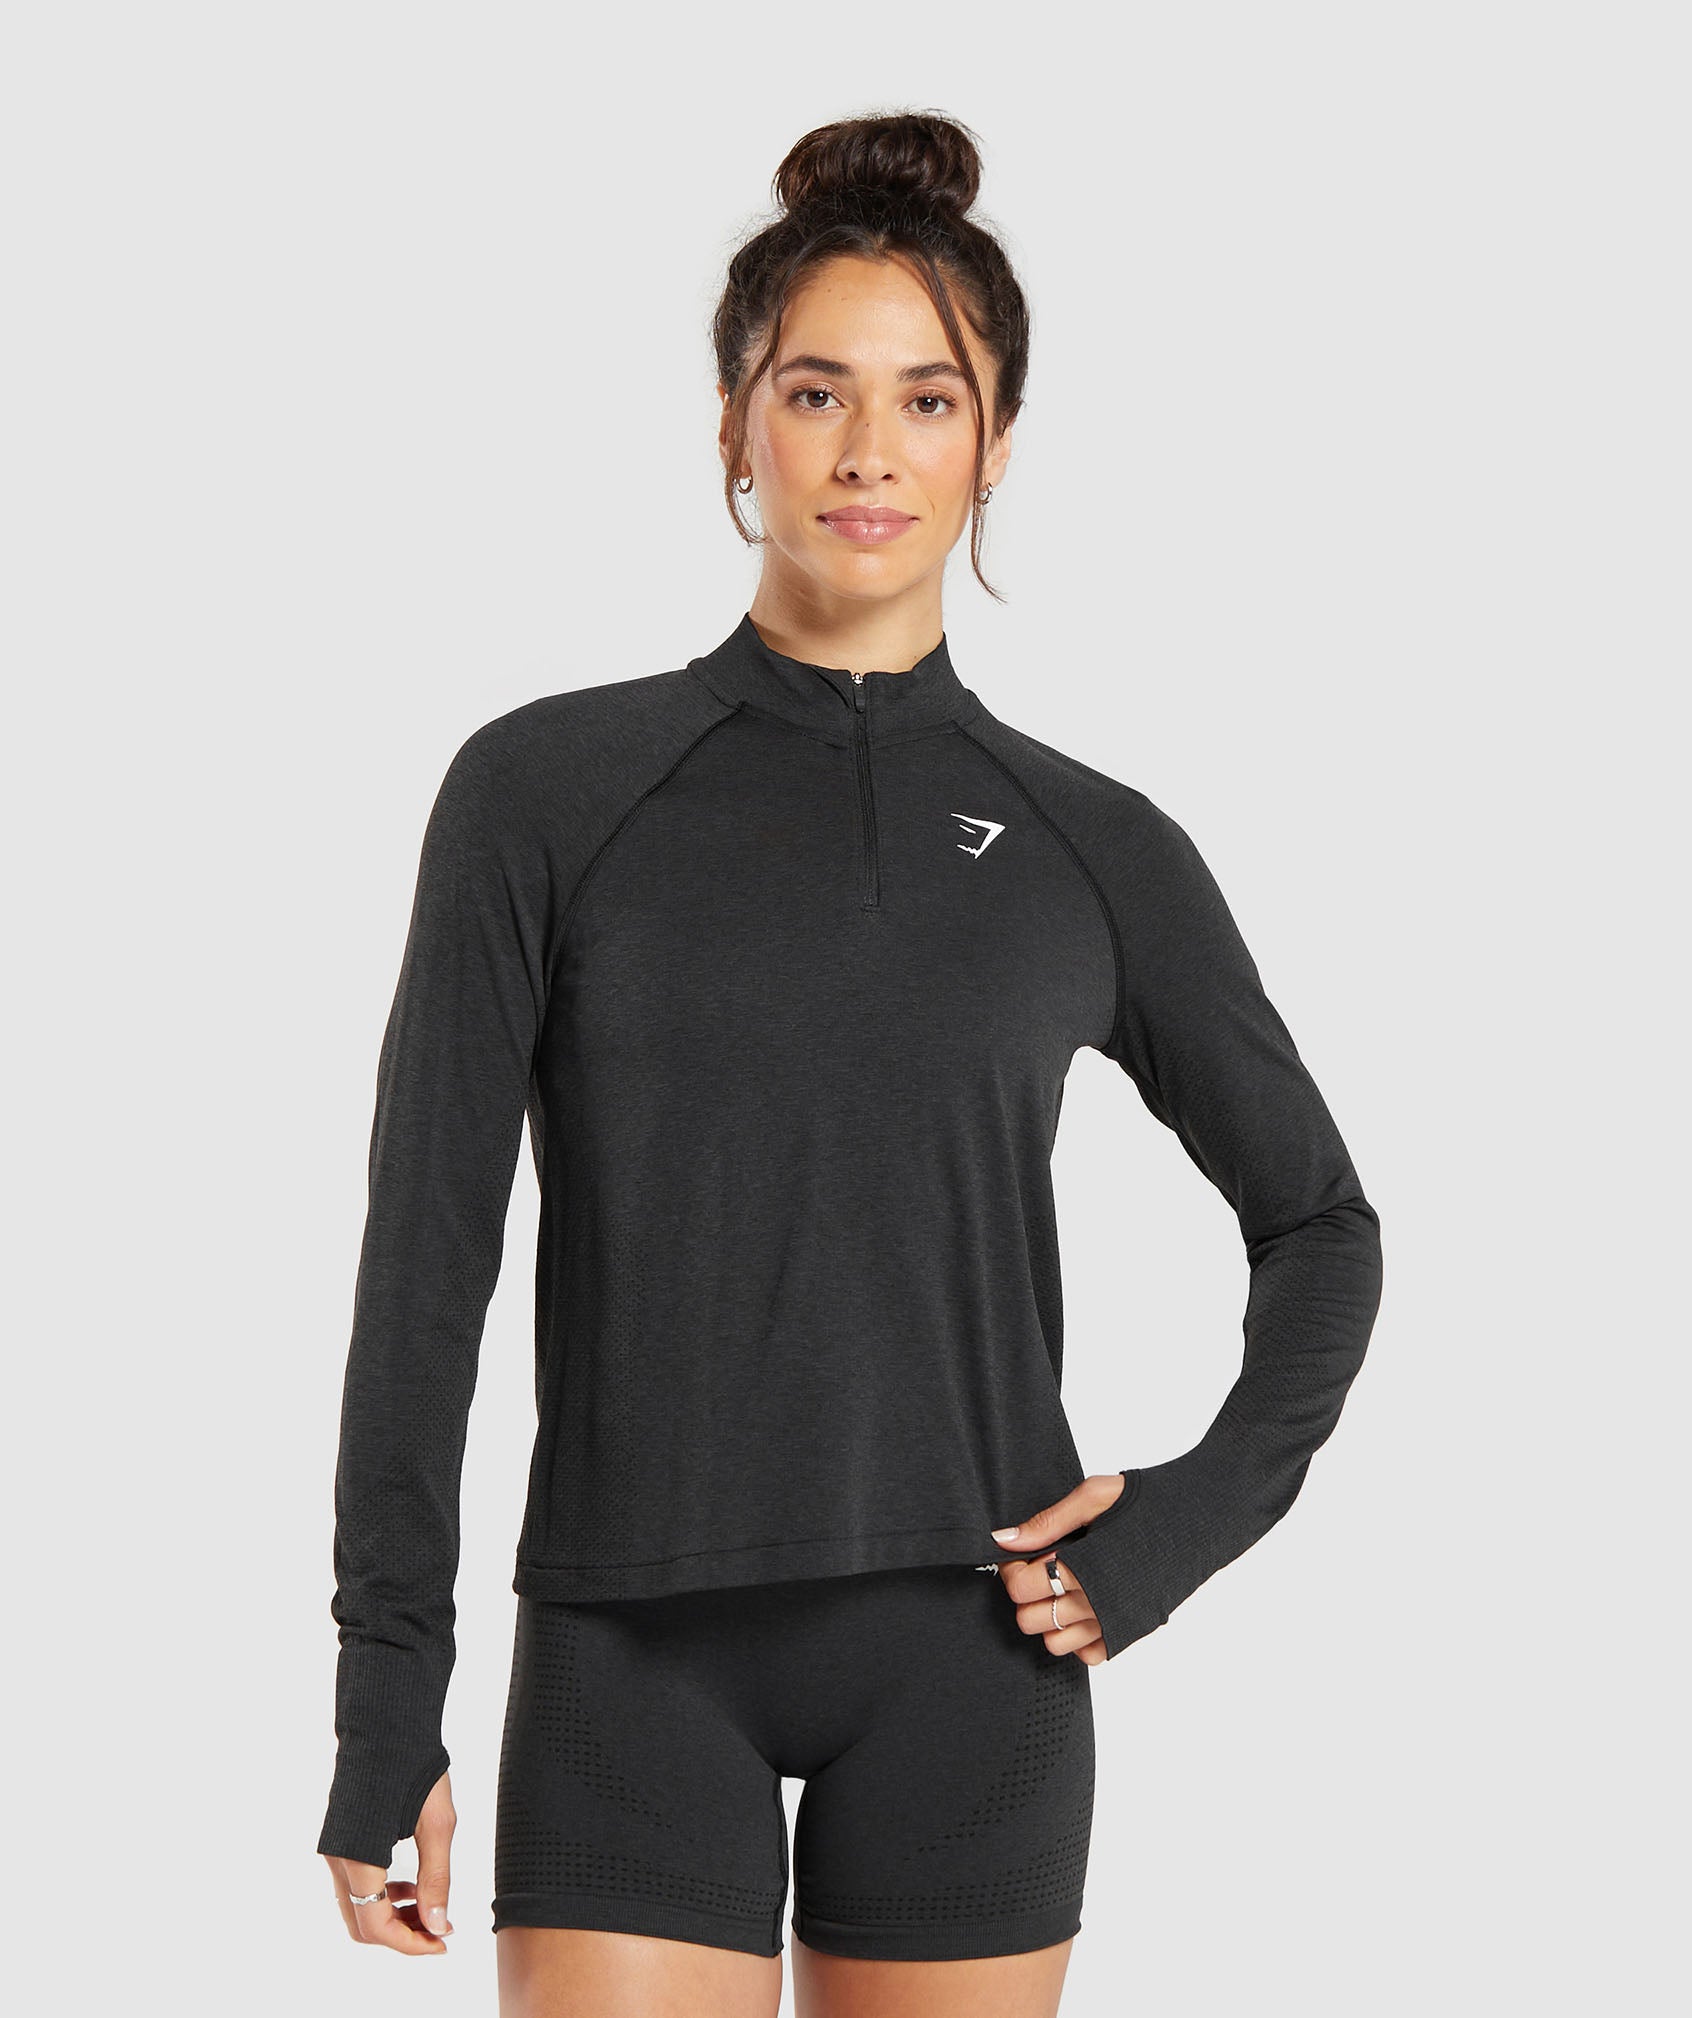 Vital Seamless 2.0 1/4 Track Top in {{variantColor} is out of stock